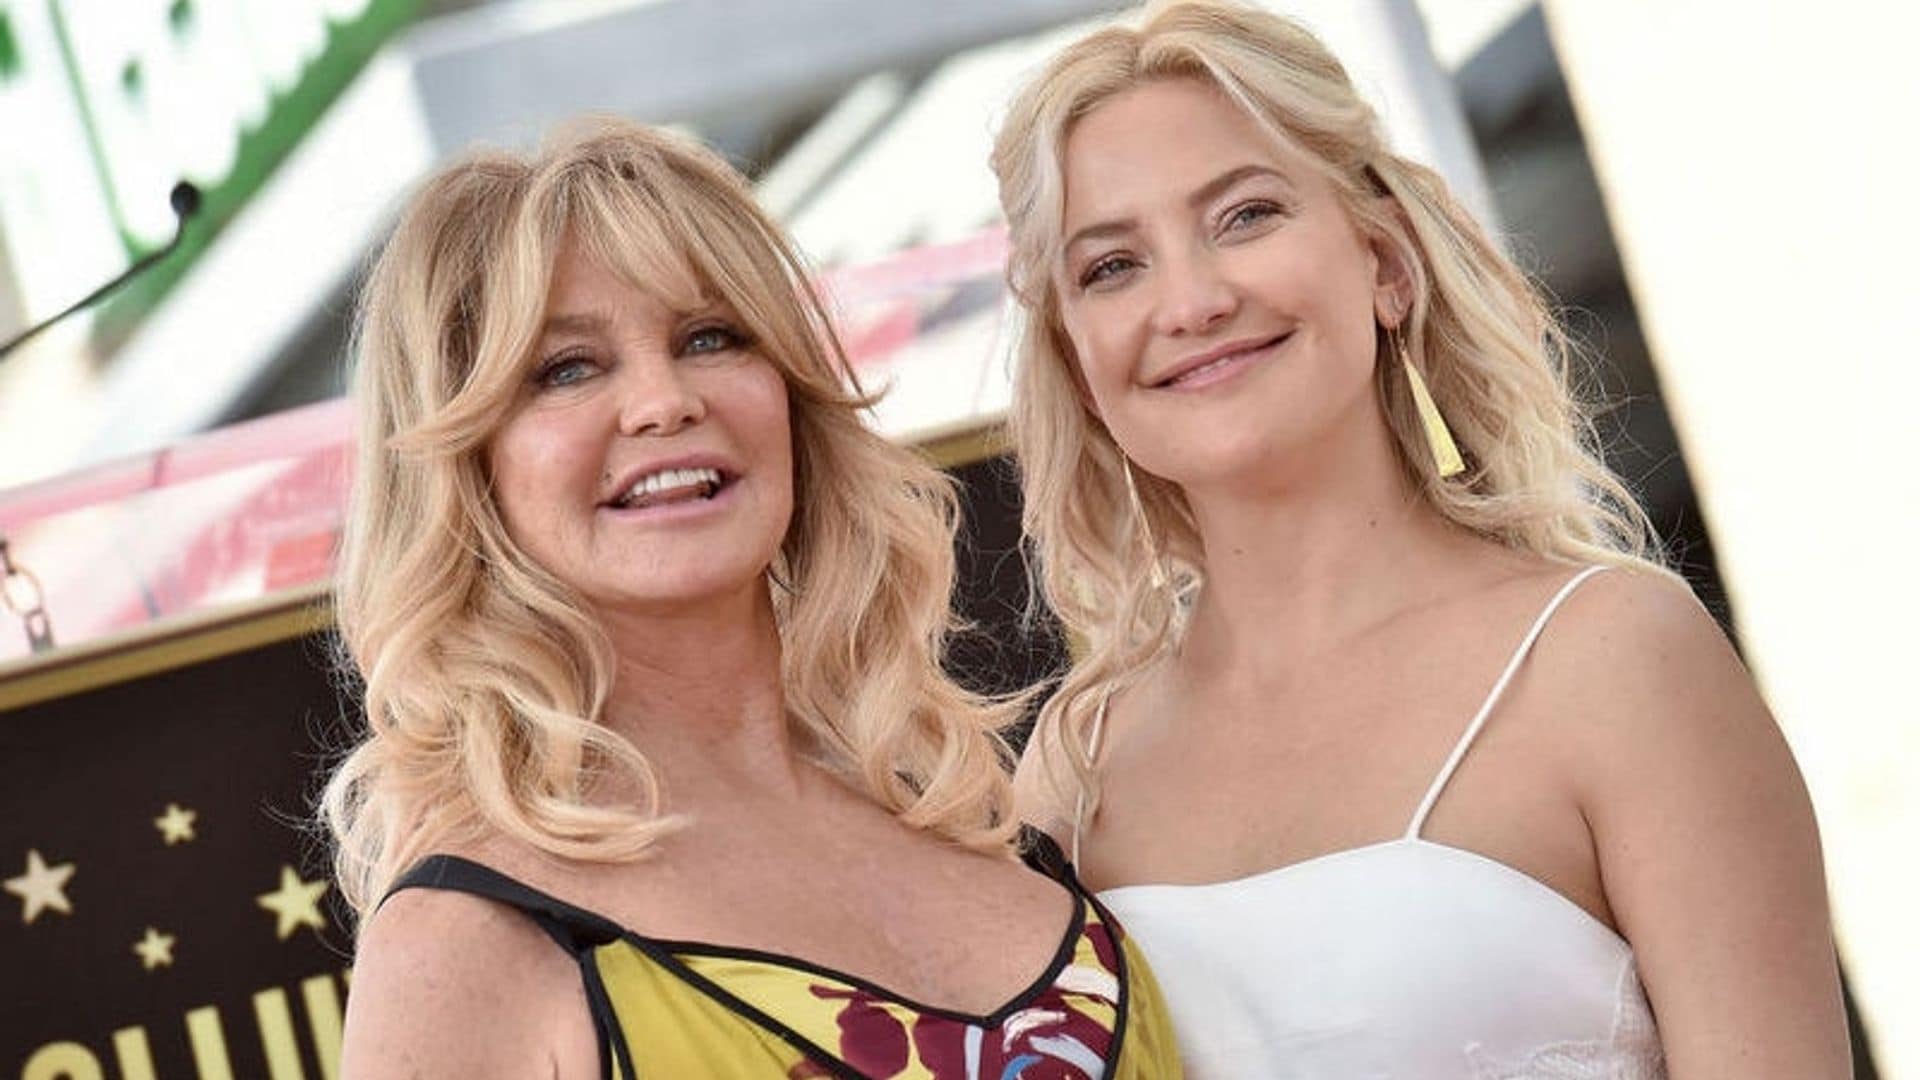 Kate Hudson, Selena Gomez and more stars open up about their moms